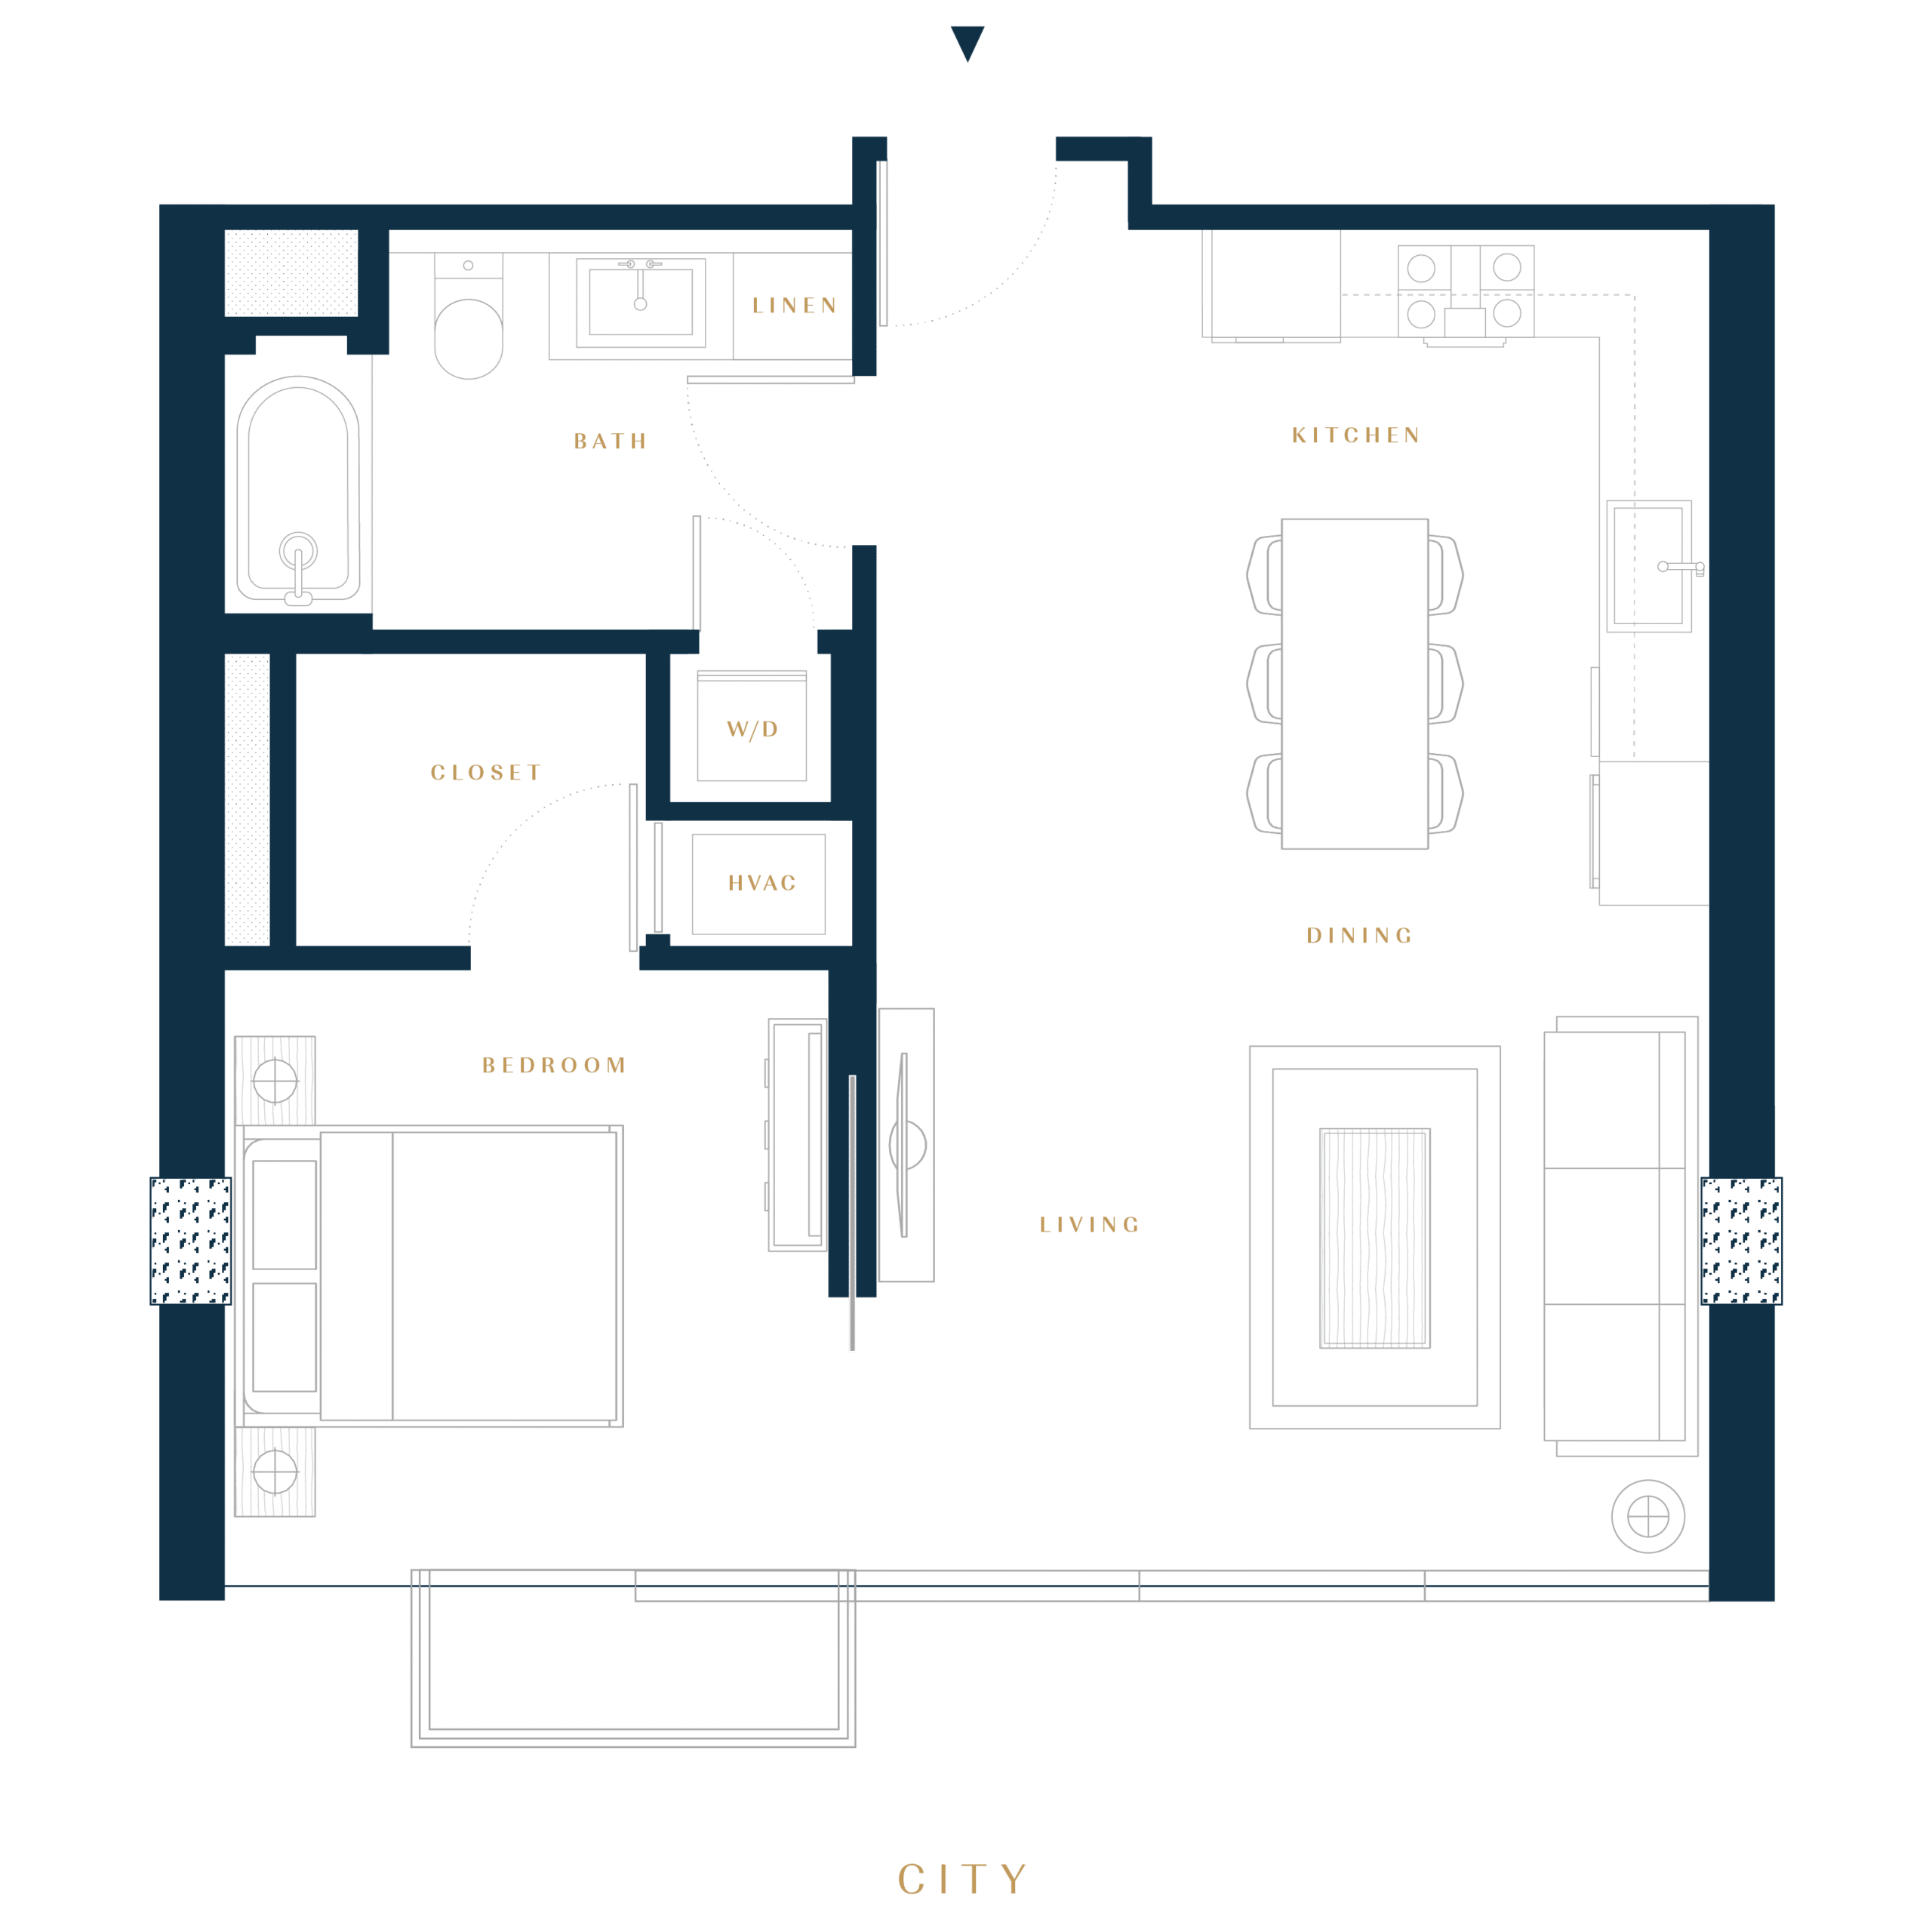 Residence 1G luxury condo floor plan in San Francisco Dogpatch